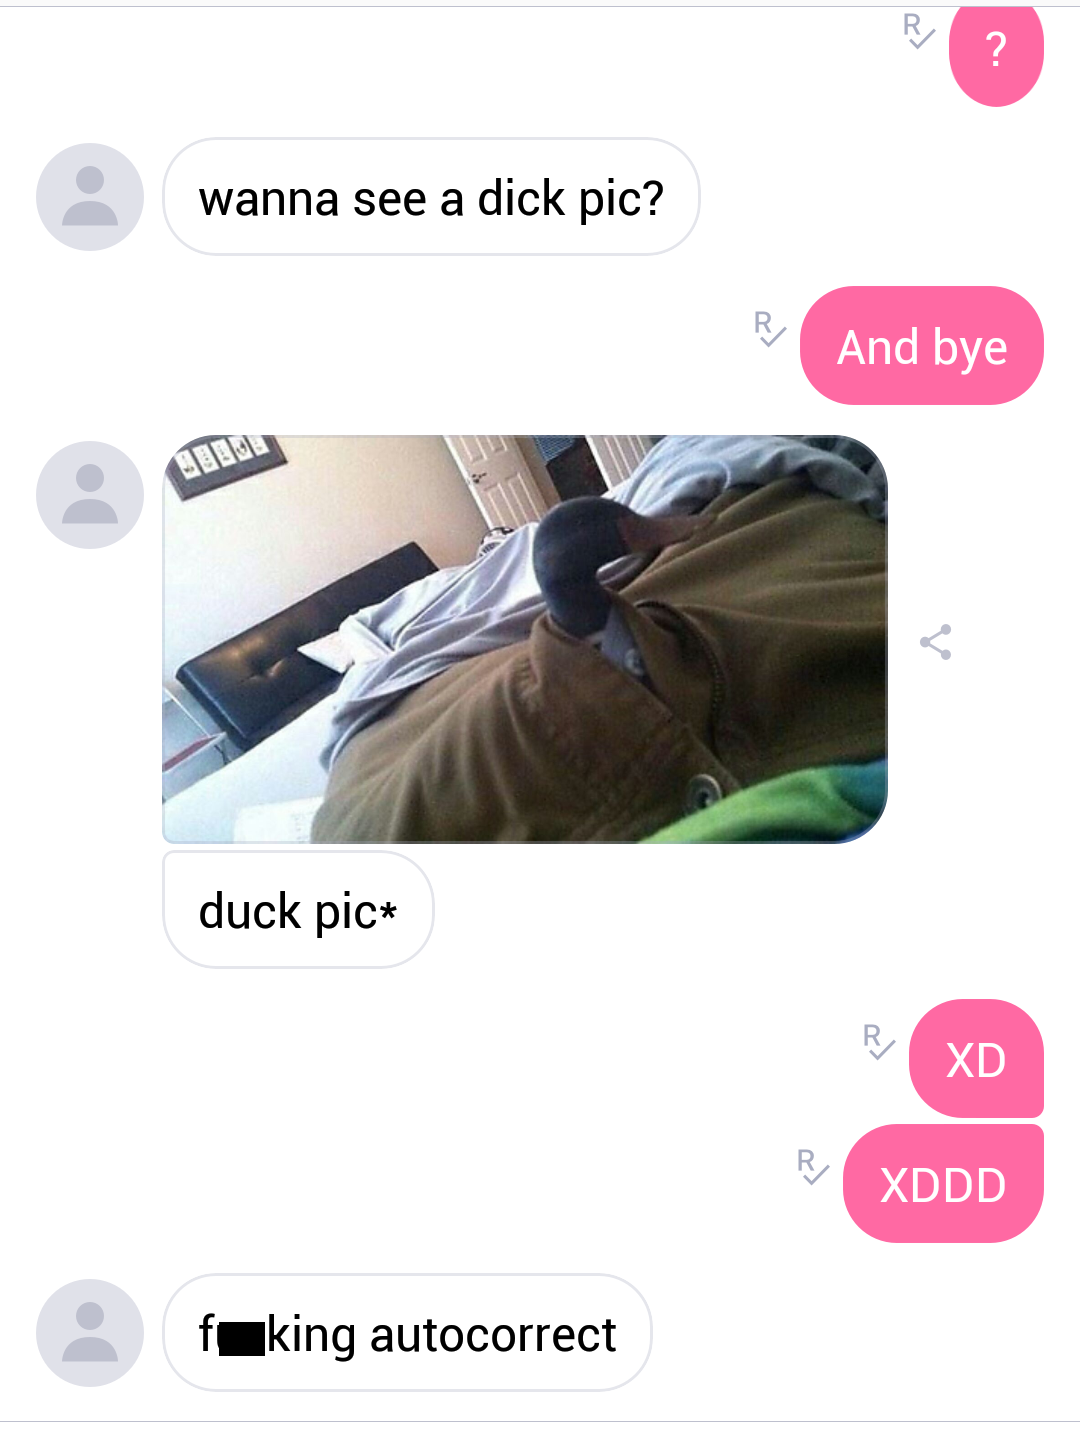 send duck - wanna see a dick pic? And bye duck pic R Xd Xddd fuking autocorrect